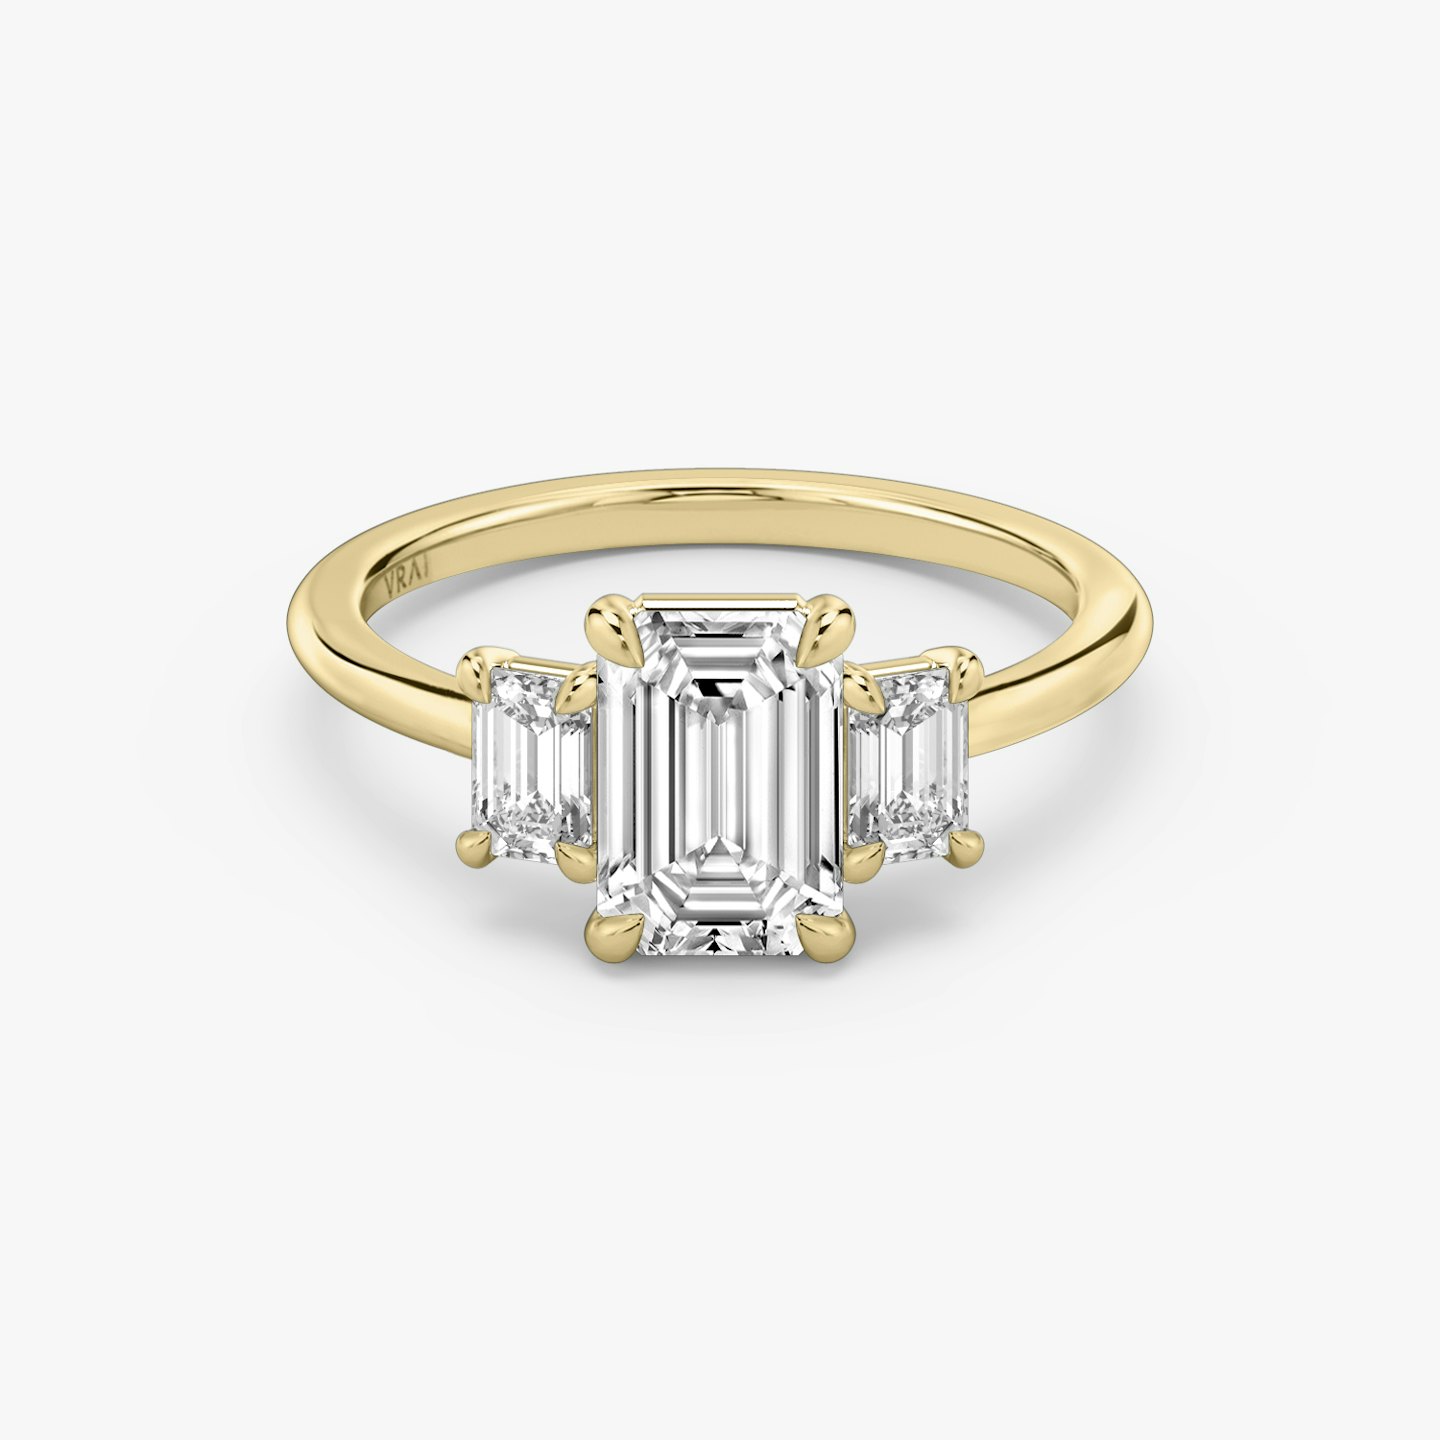 emerald cut diamond engagement ring with yellow band